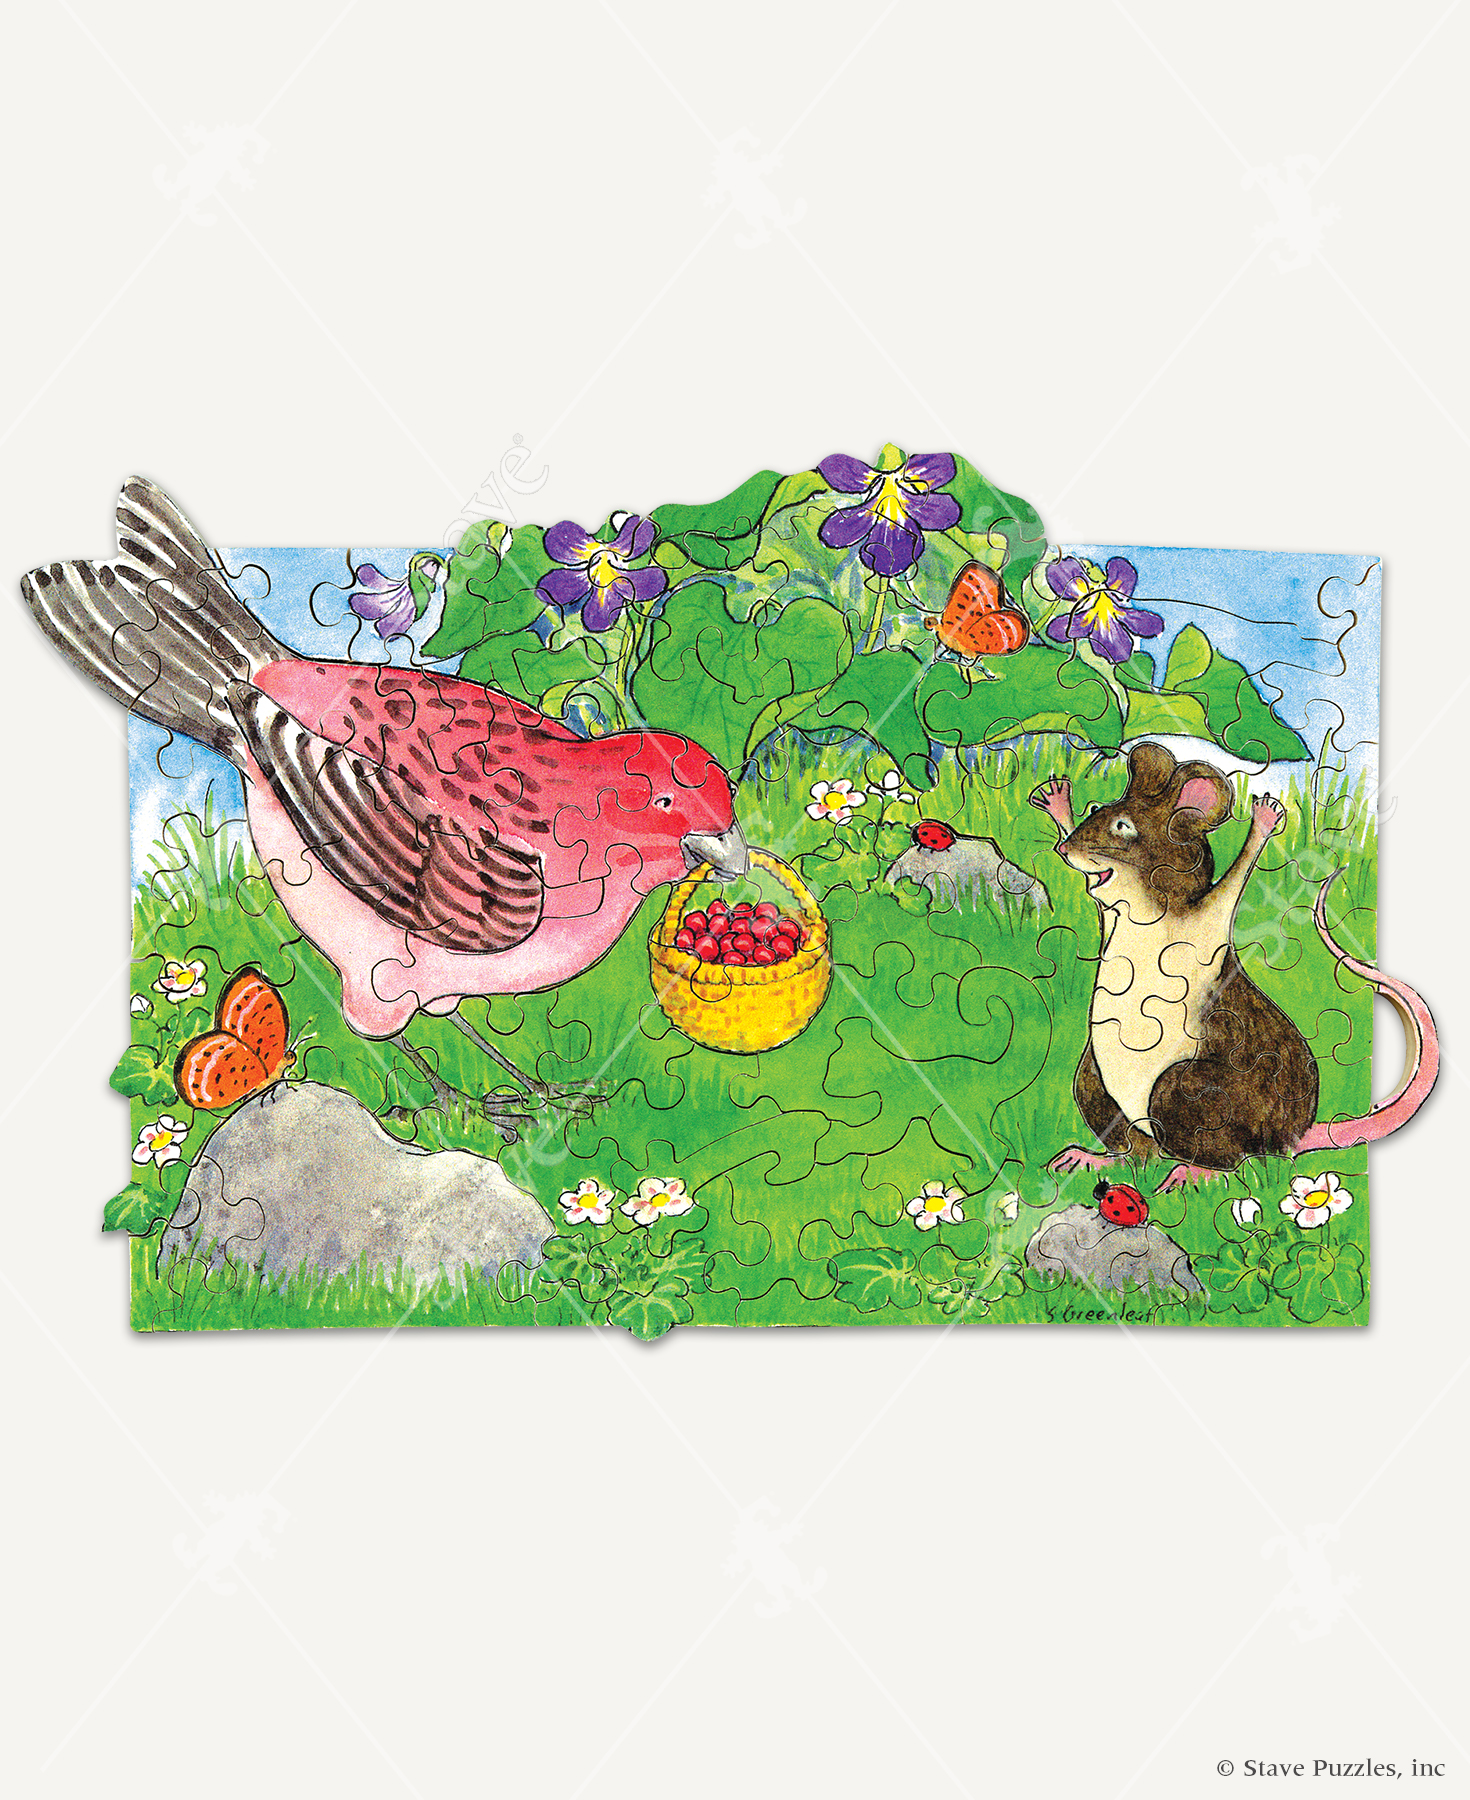 Berry Caring wooden jigsaw puzzle of a bird holding a basket of berries in its beak, sharing them with its mouse friend. The mouse has its arms up in the air as it cheers in happiness. During this spring scene, butterflies and ladybugs watch the two friends as they sit on rocks and a flower bush in the background.